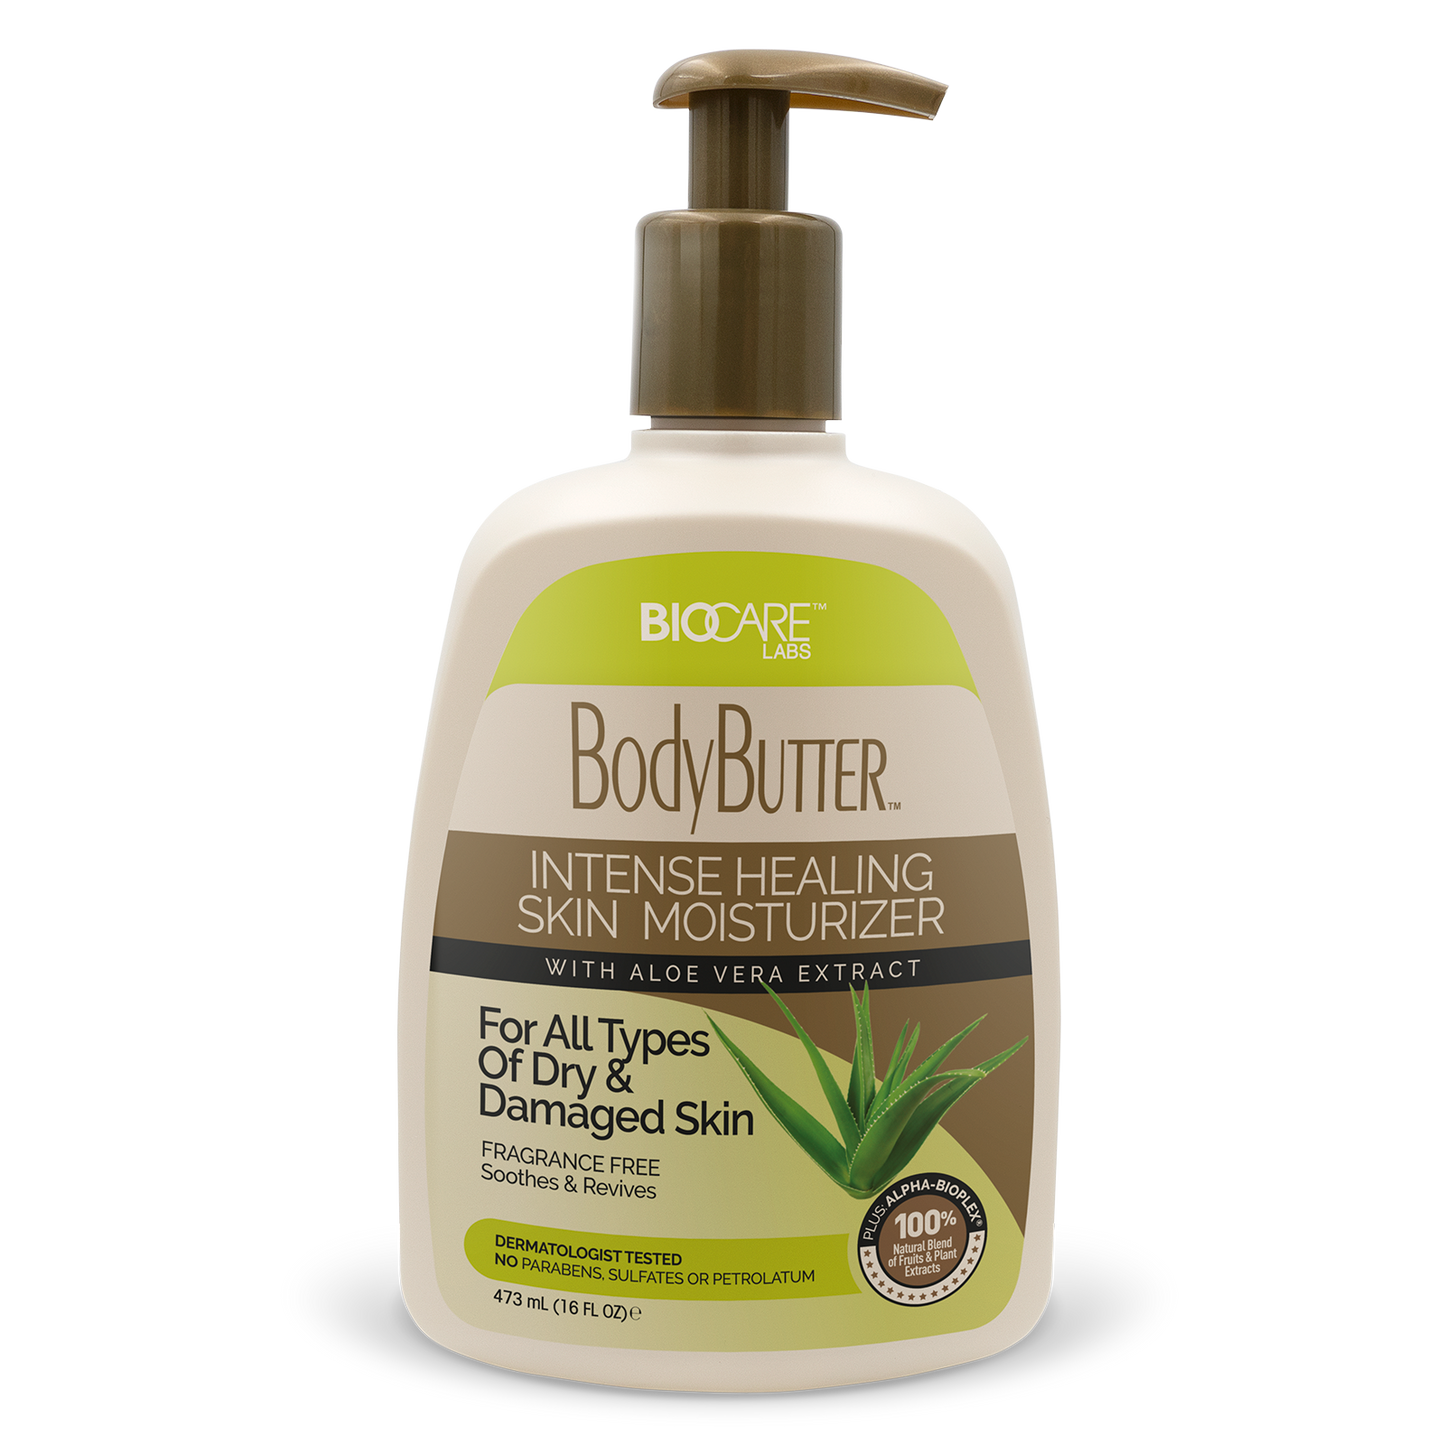 16 oz container of BodyButter™ With Aloe Vera Extract, Cucumber Extract, & Alpha-Bioplex ®